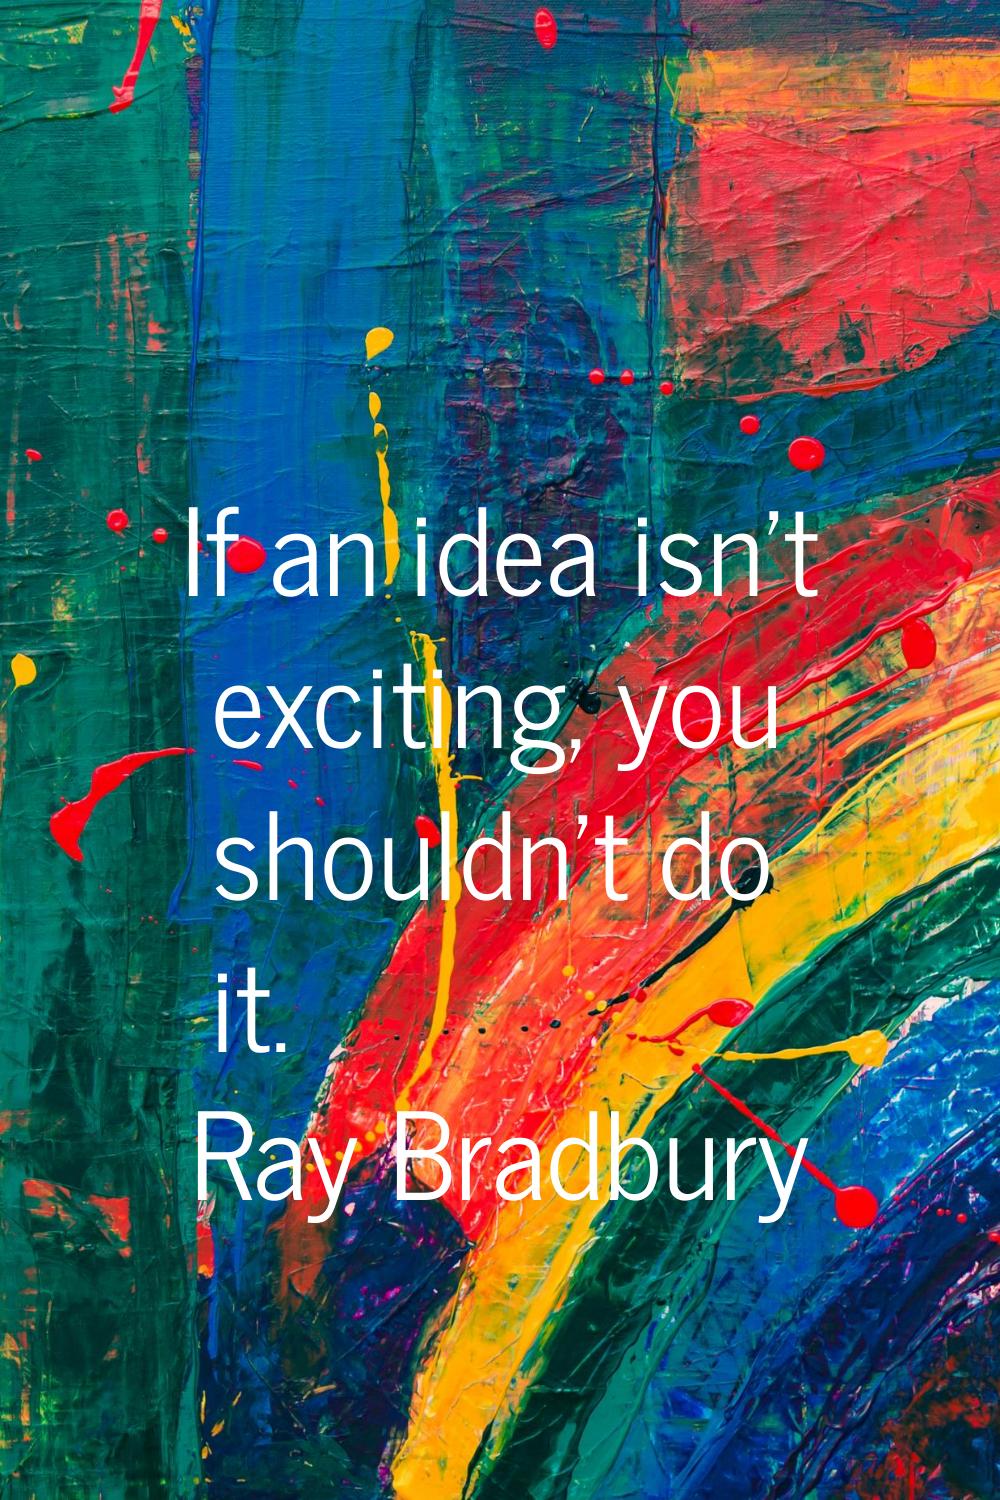 If an idea isn't exciting, you shouldn't do it.